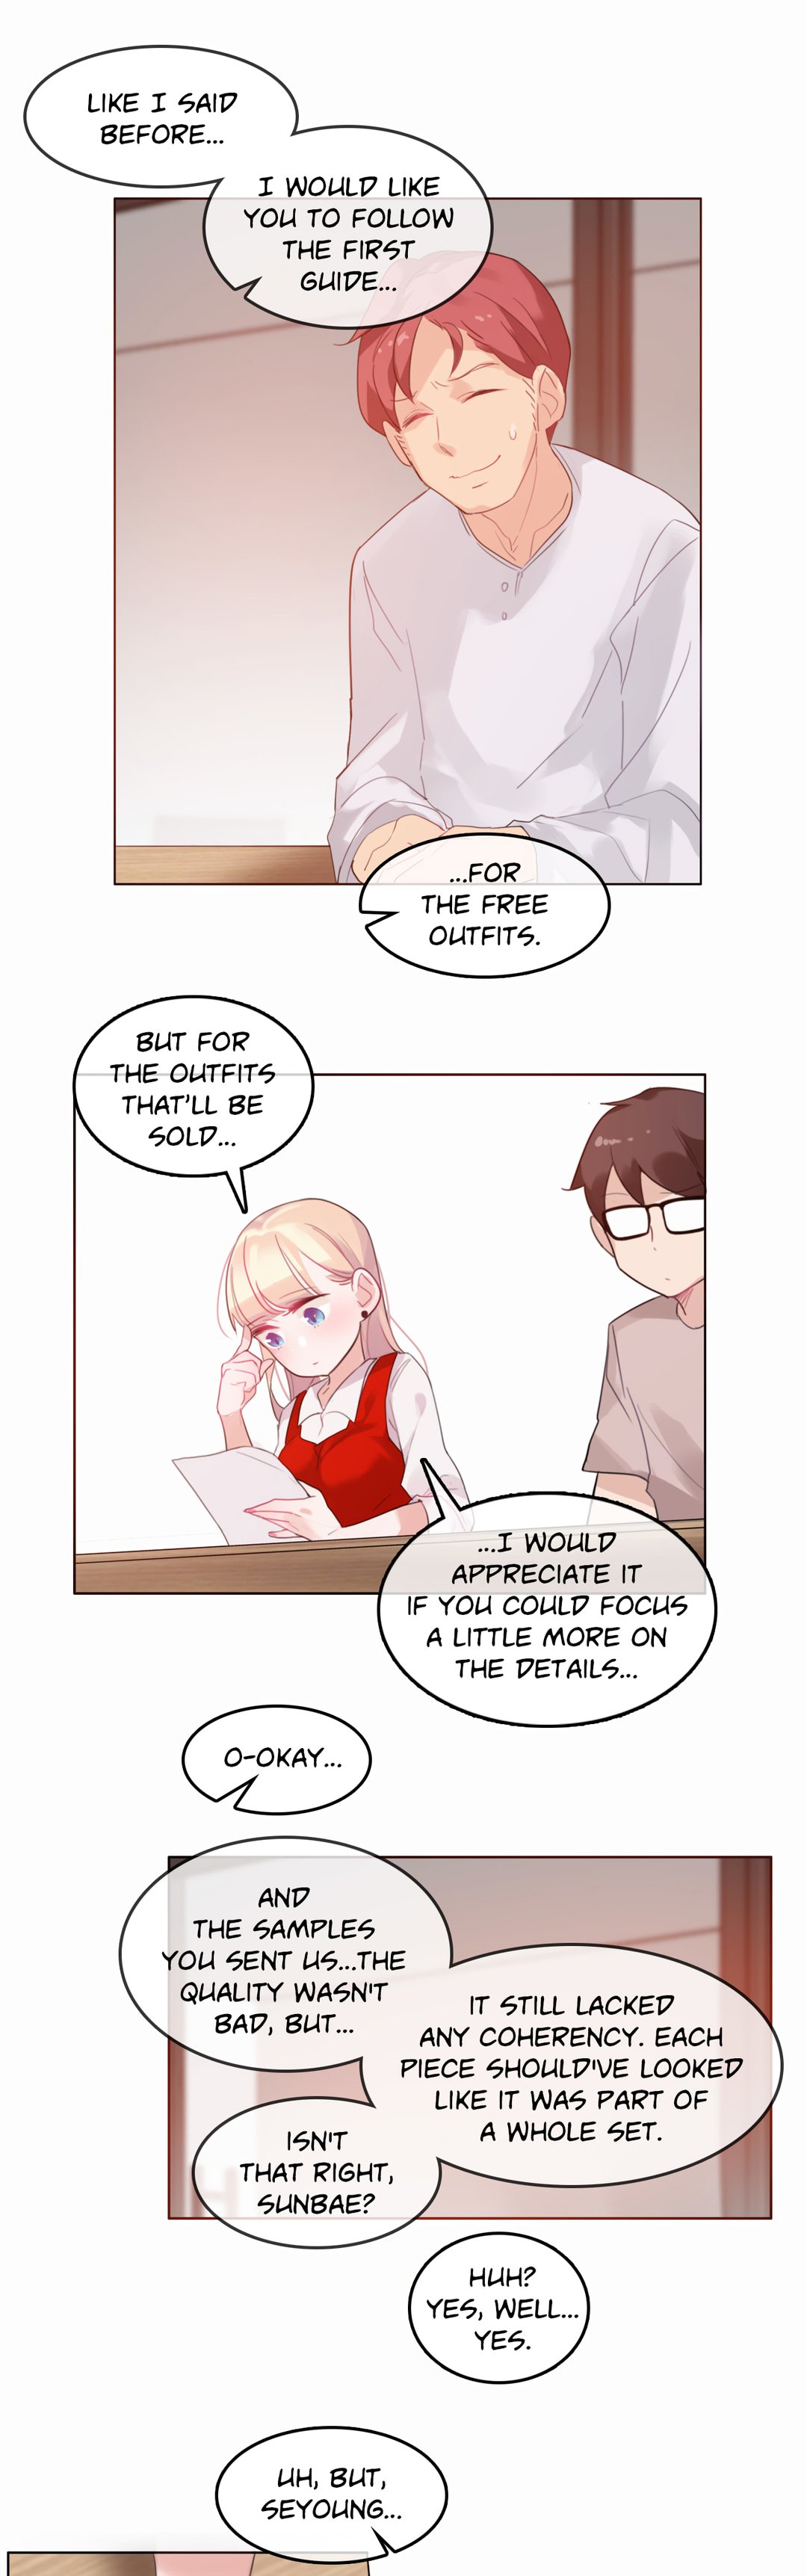 A Pervert's Daily Life Ch.22